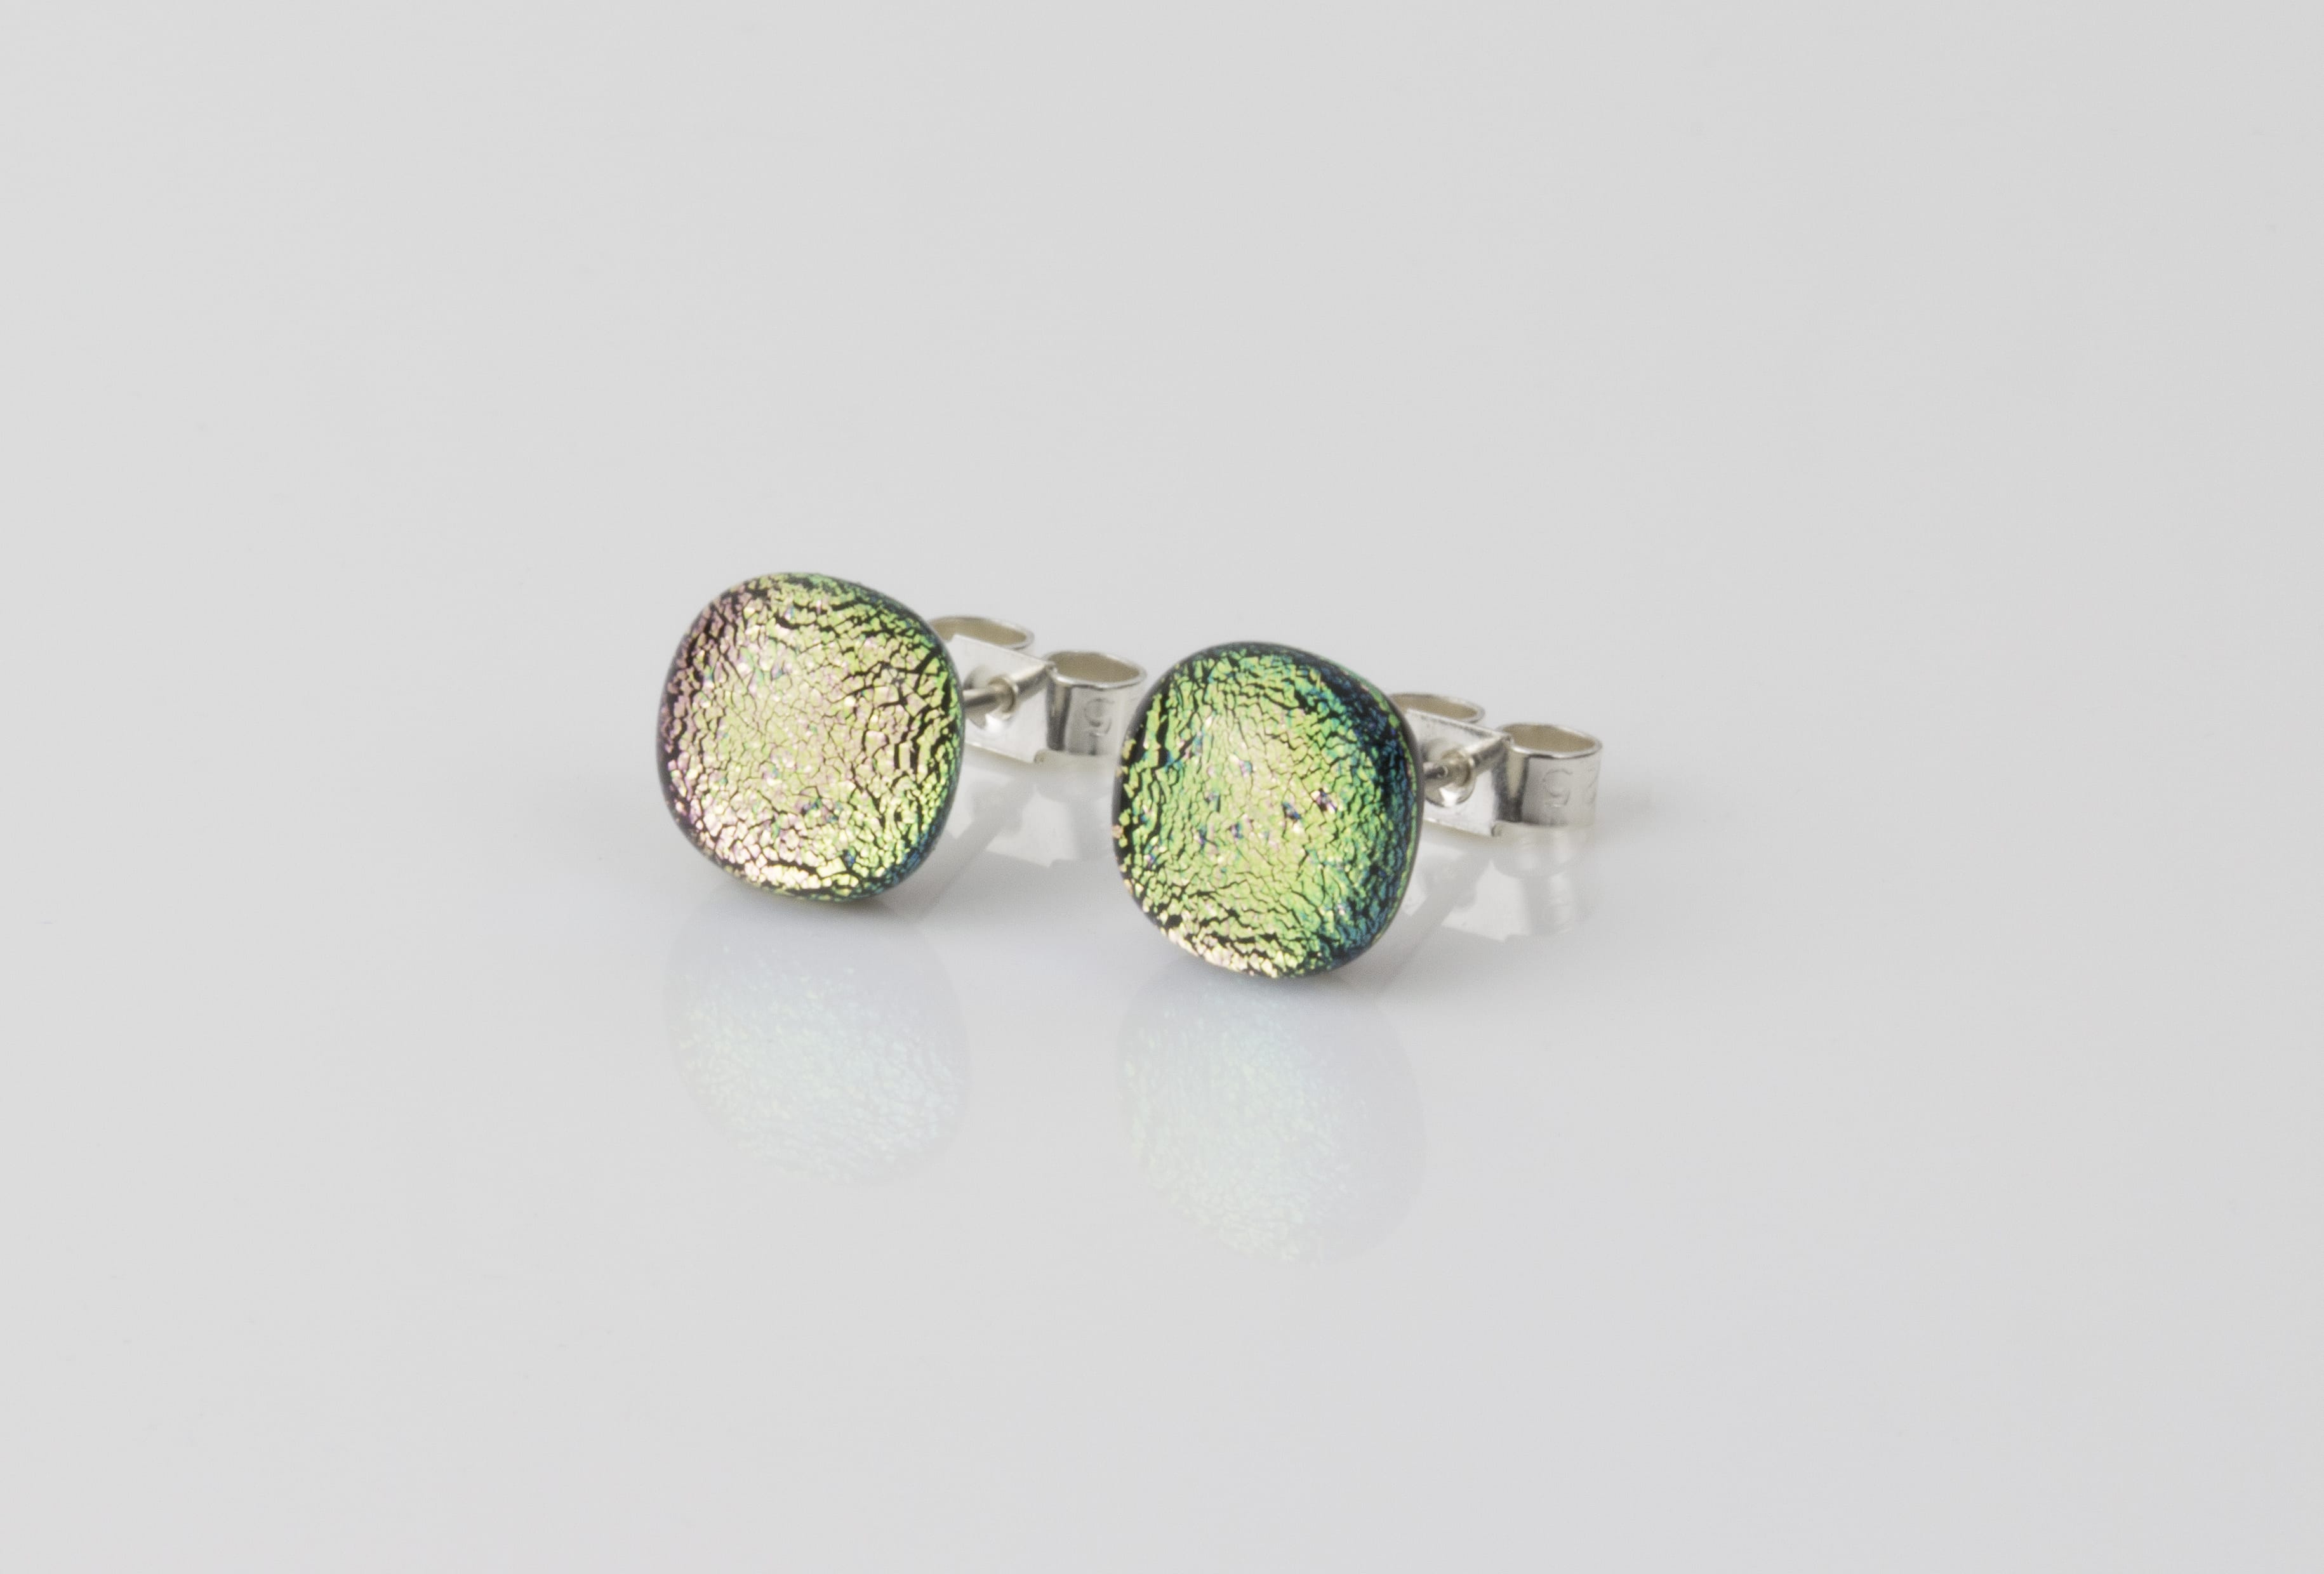 Dichroic glass jewellery uk, handmade stud earrings with pale pink dichroic glass, round, sterling glass 7-9mm, silver posts.